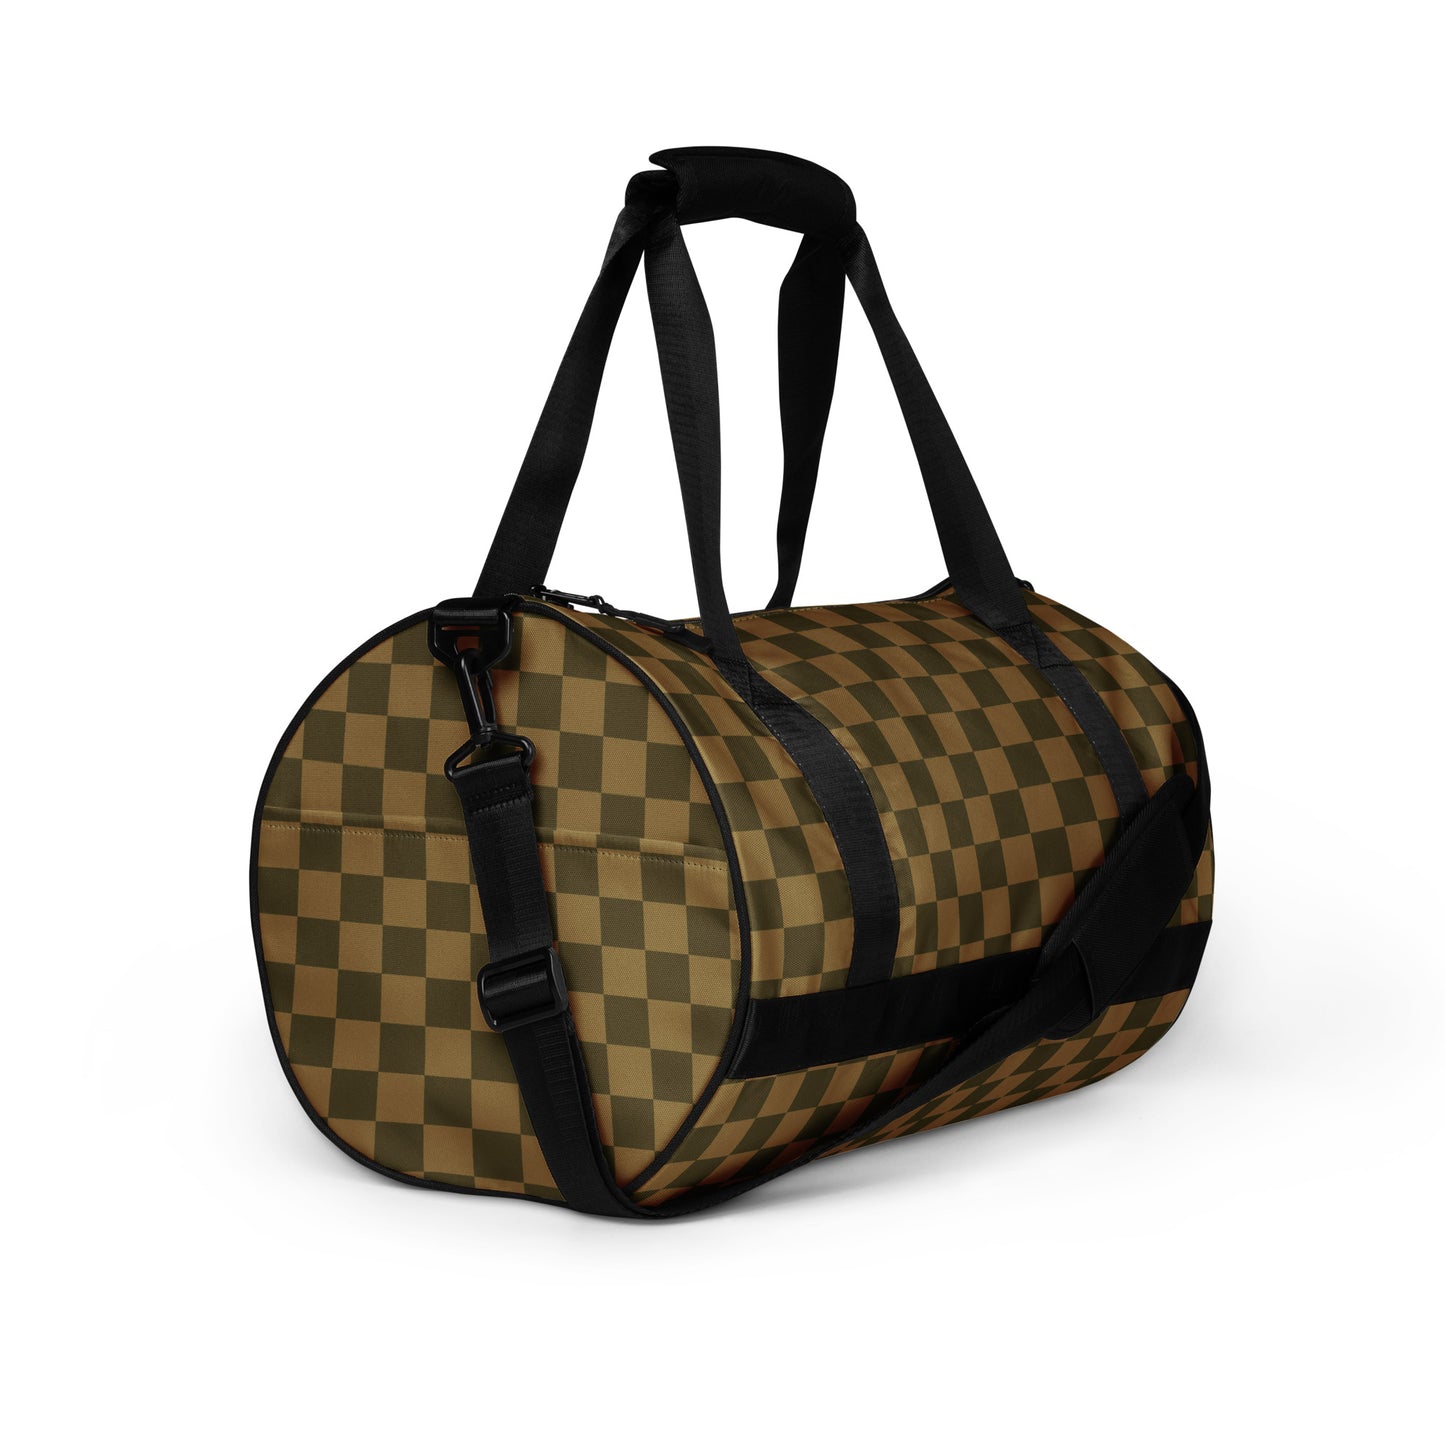 Wempy Dyocta Koto Signature Casual - Sustainably Made gym bag